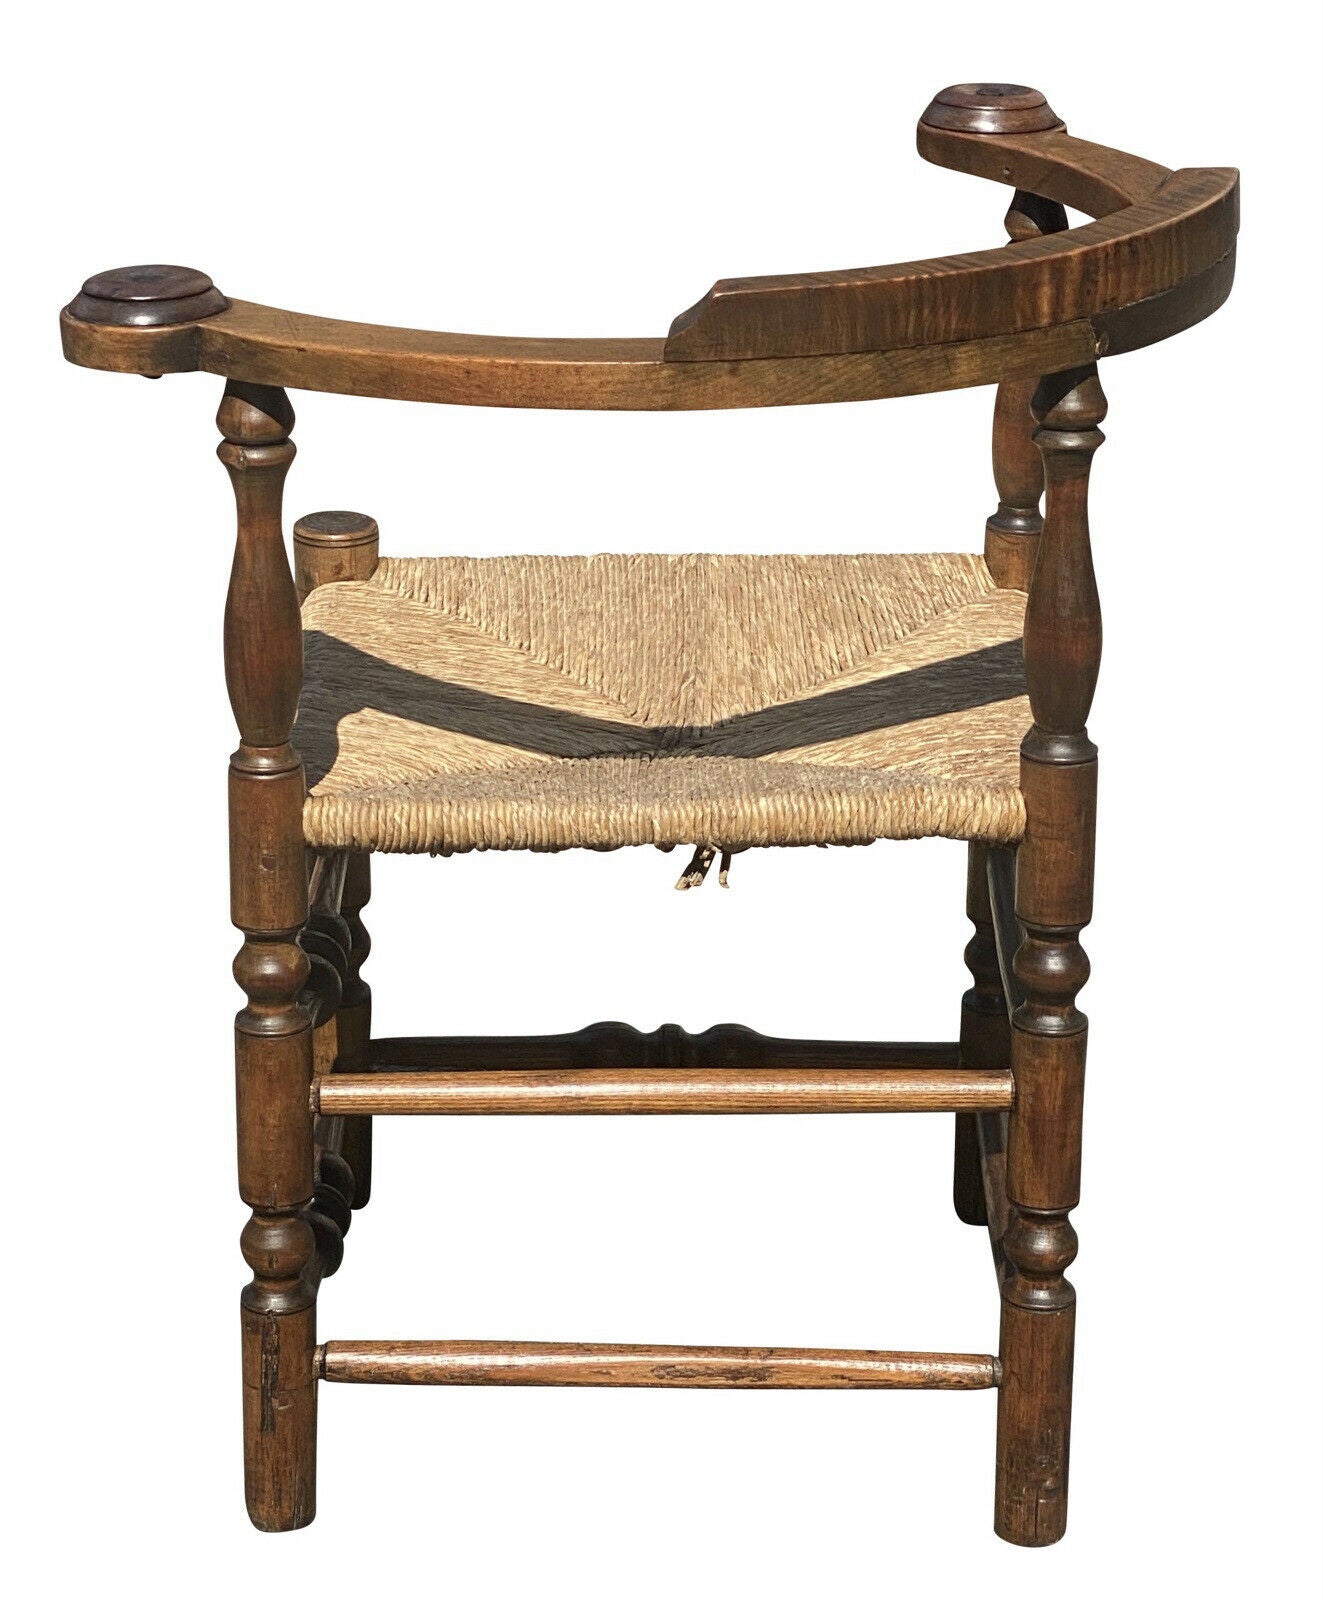 18TH C ANTIQUE QUEEN ANNE TIGER MAPLE ROUNDABOUT / CORNER CHAIR W/ RUSH SEAT